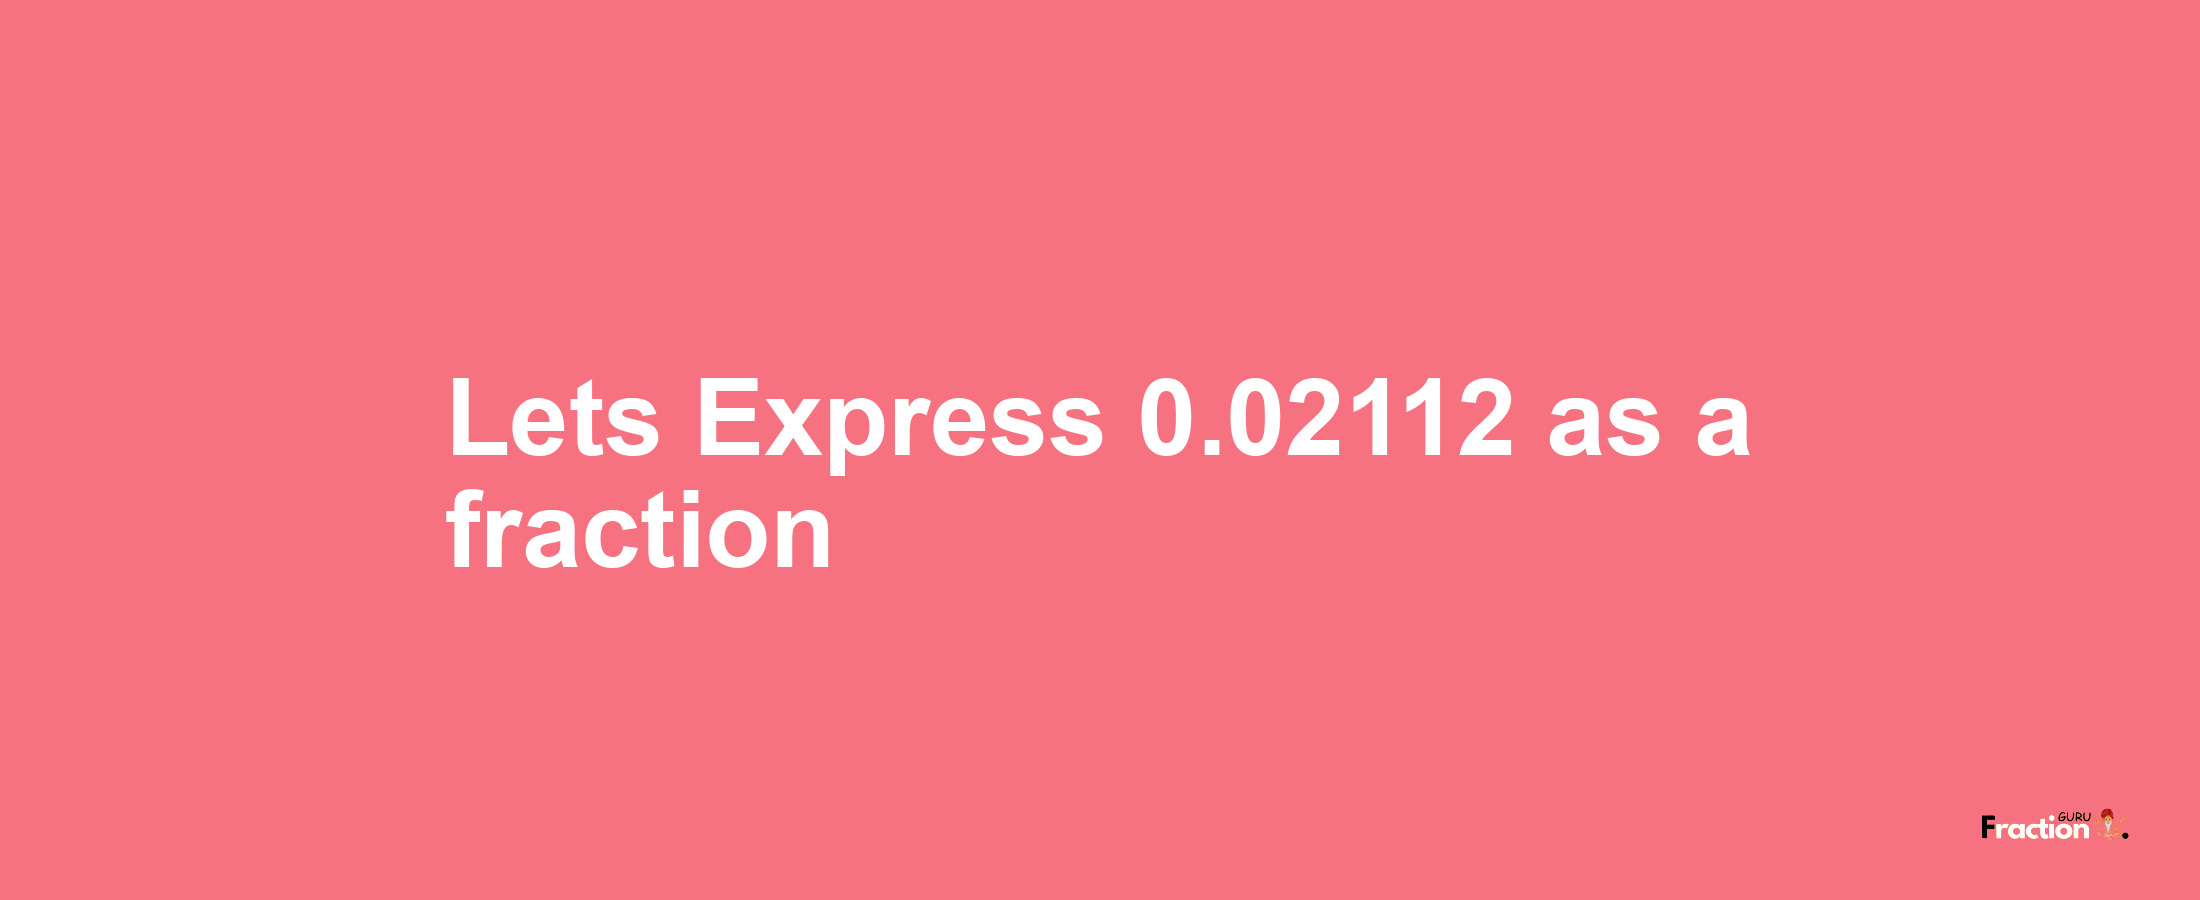 Lets Express 0.02112 as afraction